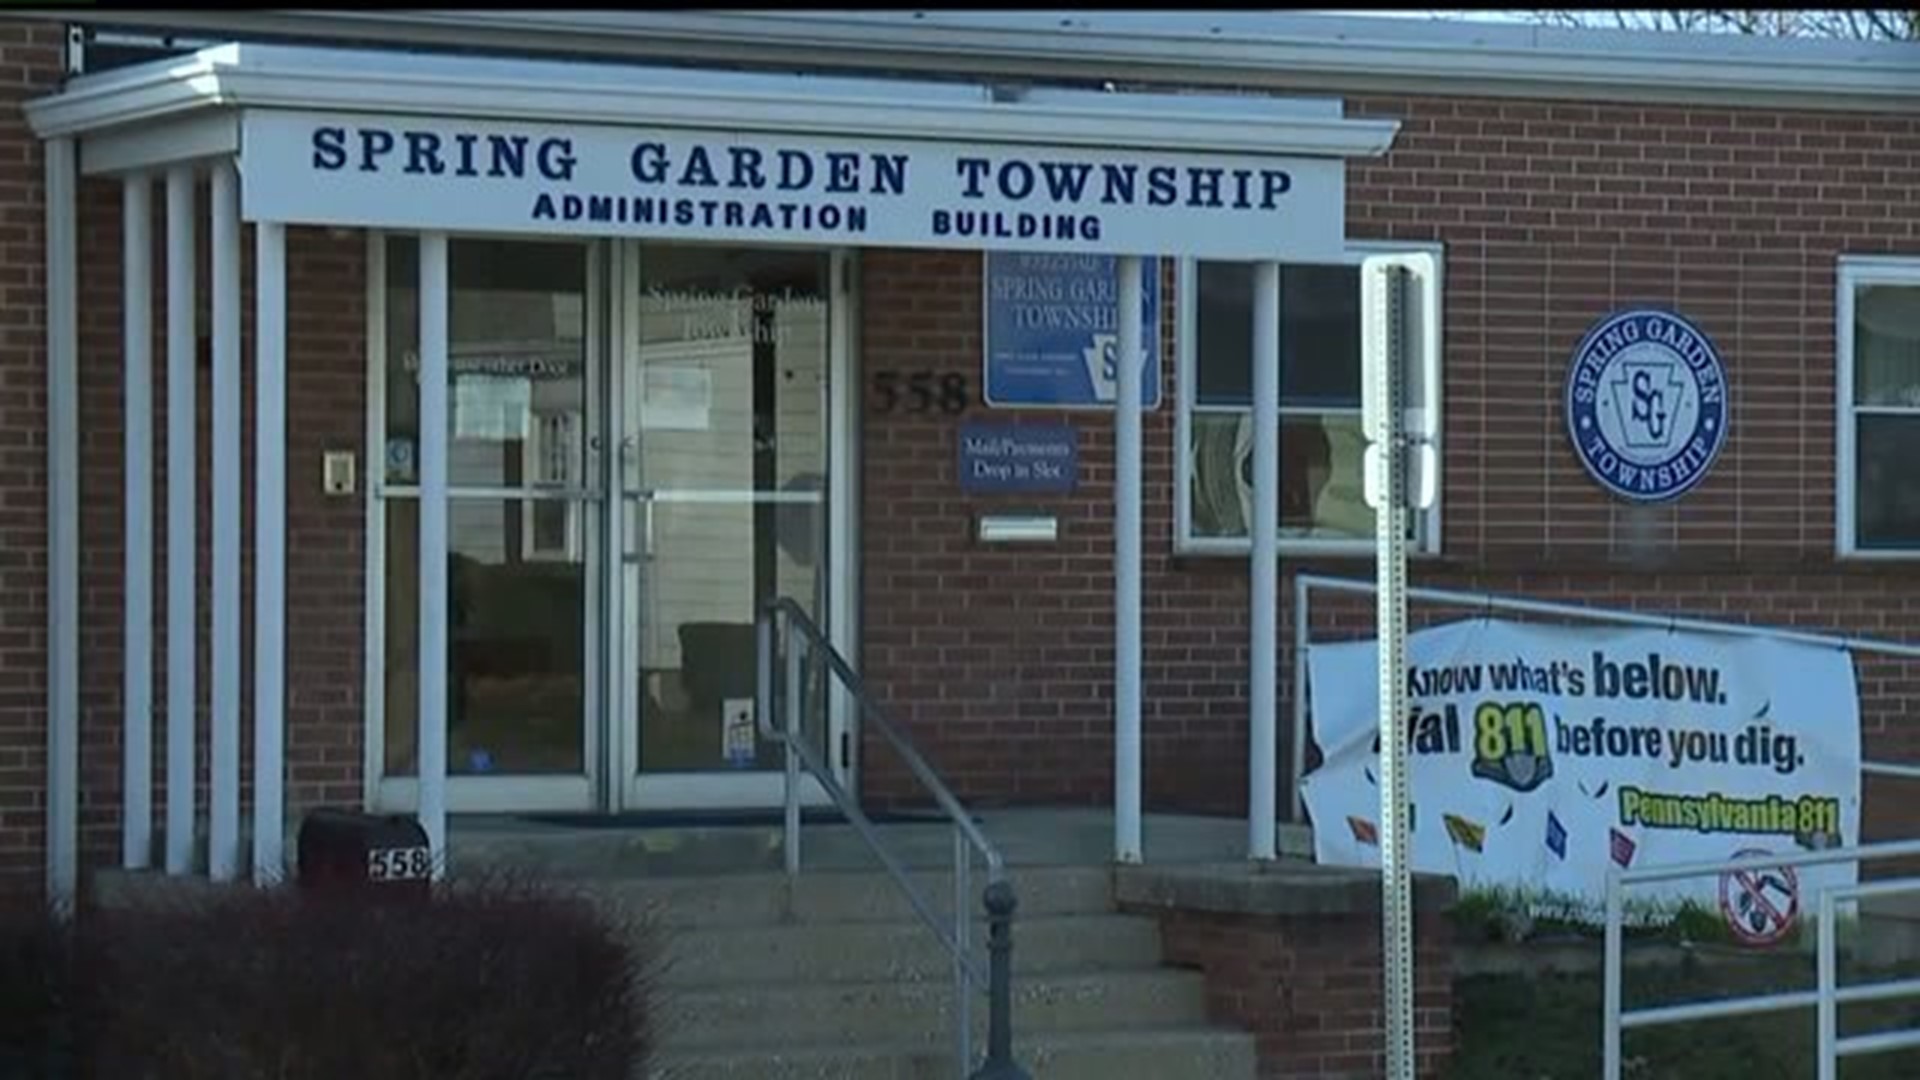 Another option for new municipal complex in Spring Garden Township